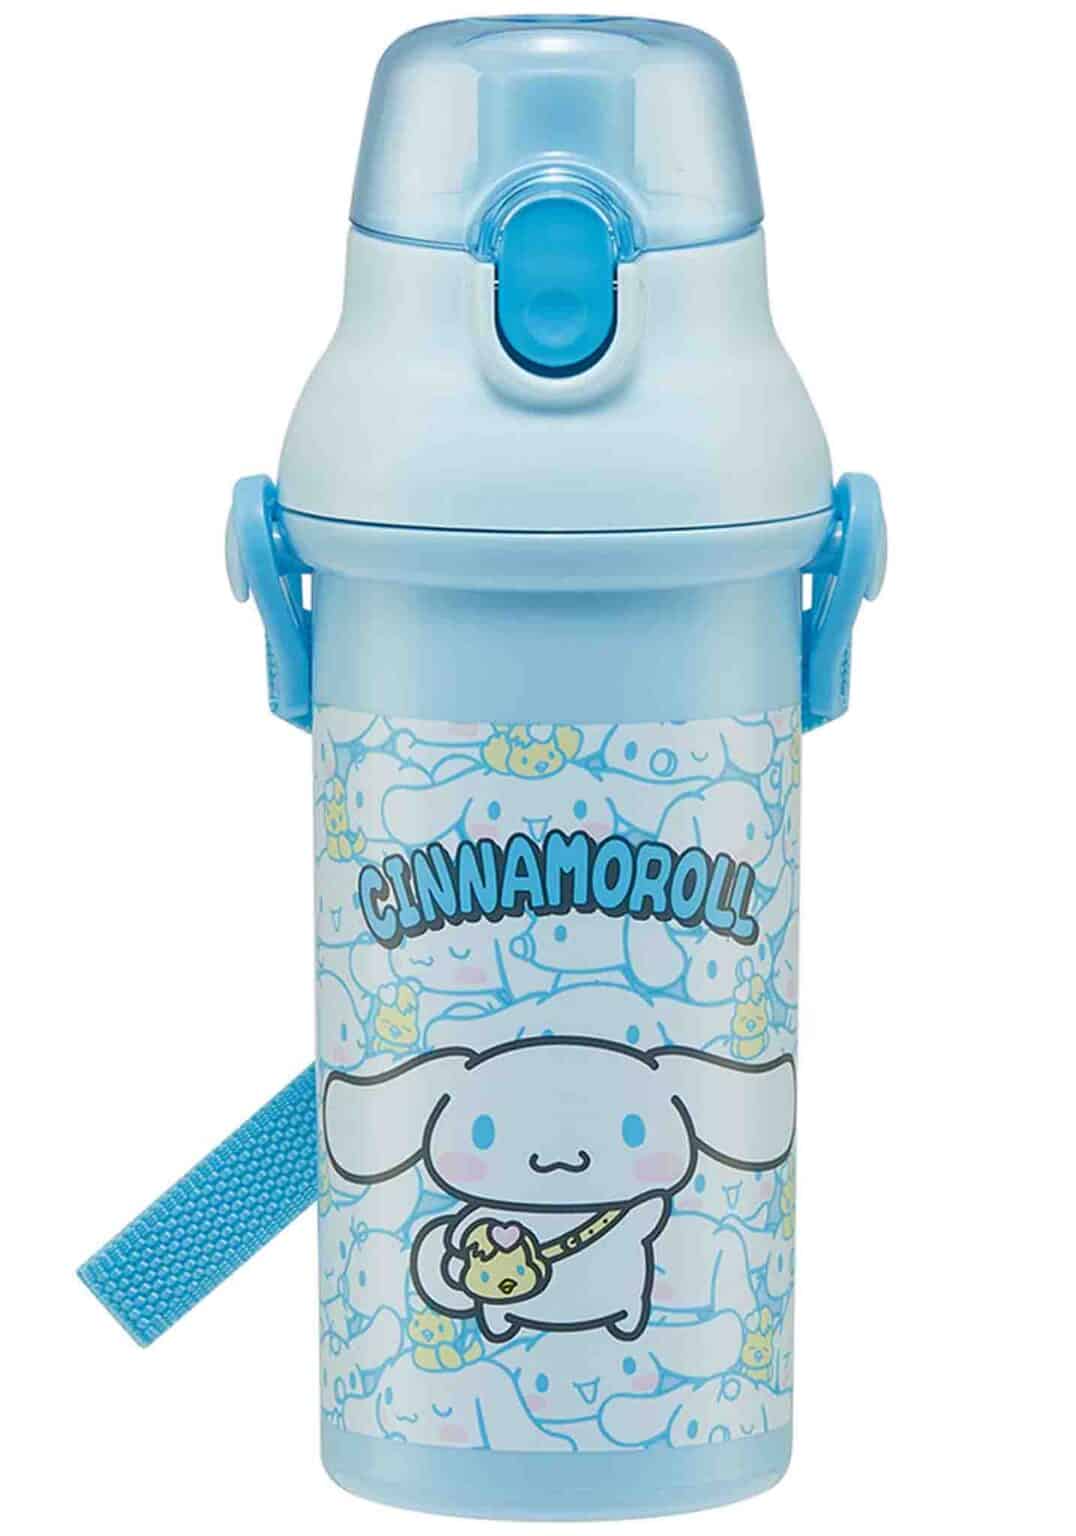 Clever Idiots Sanrio Friends Easy Pop-Up Water Bottle : Cinnamoroll, Hello Kitty, My Melody Cinnamoroll Kawaii Gifts 4973307600500